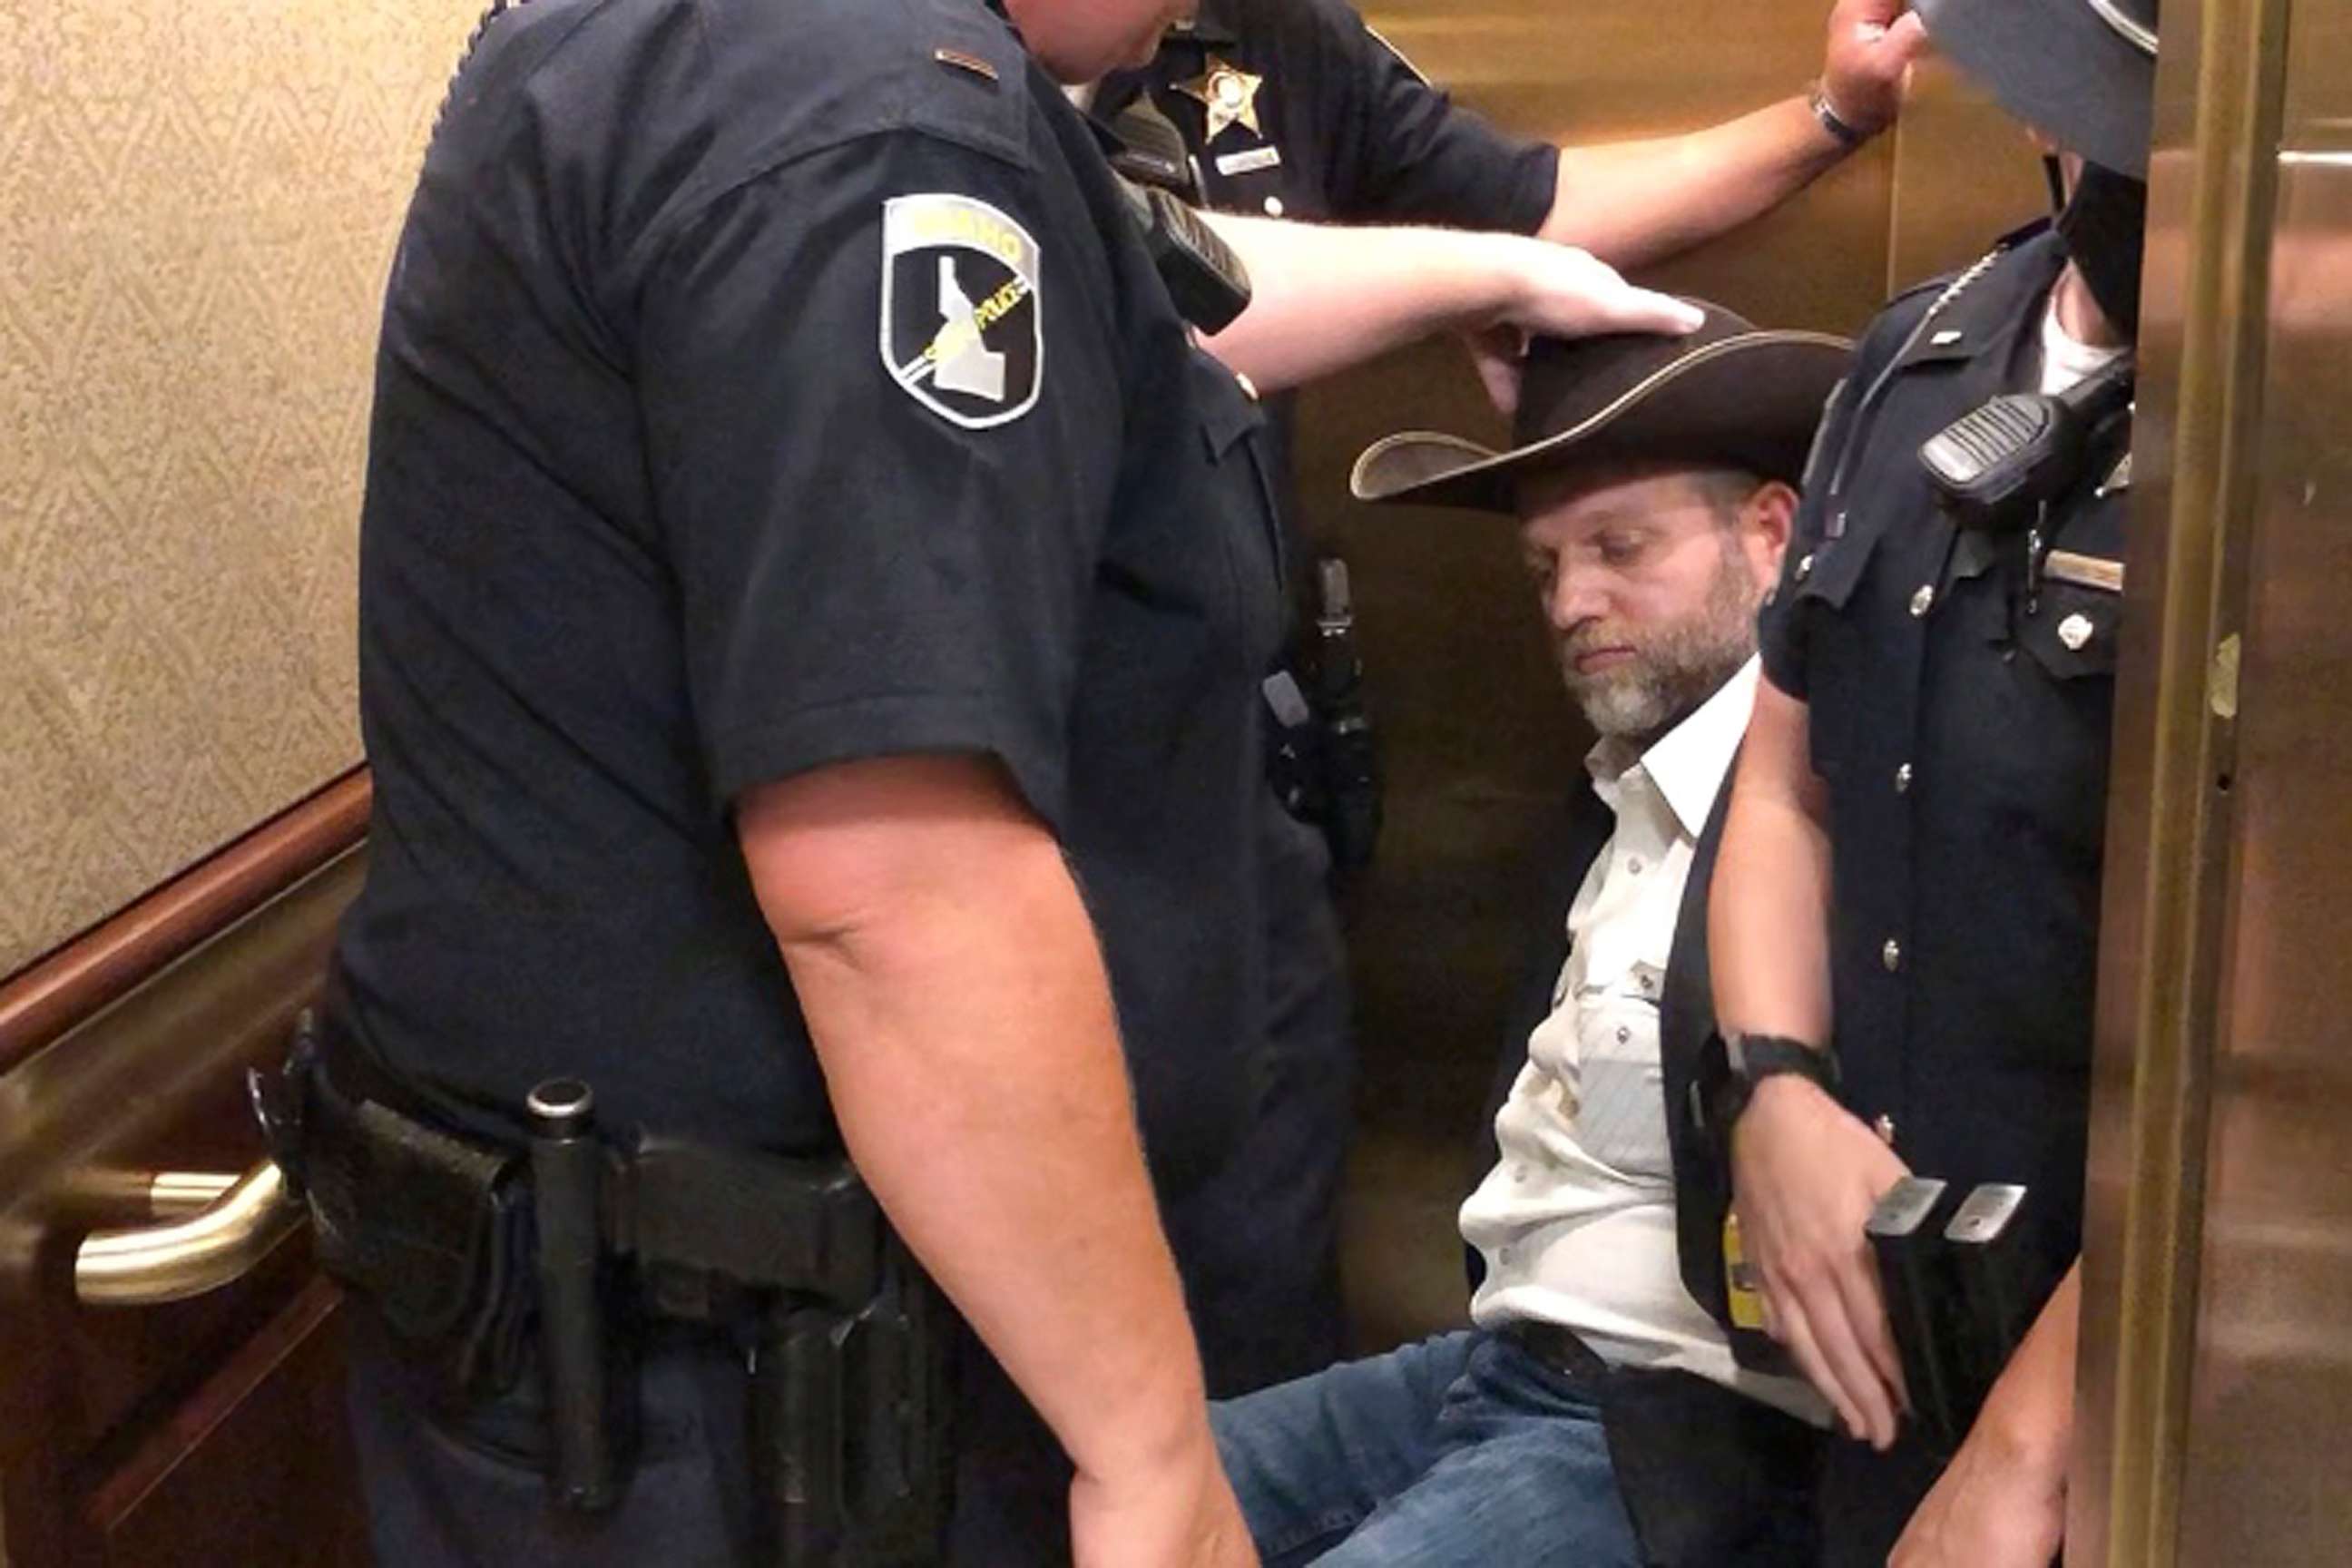 PHOTO: This image taken from video shows anti-government activist Ammon Bundy, rear, being wheeled into an elevator in a chair following his arrest at the Idaho Statehouse in Boise, Idaho, Aug. 25, 2020.